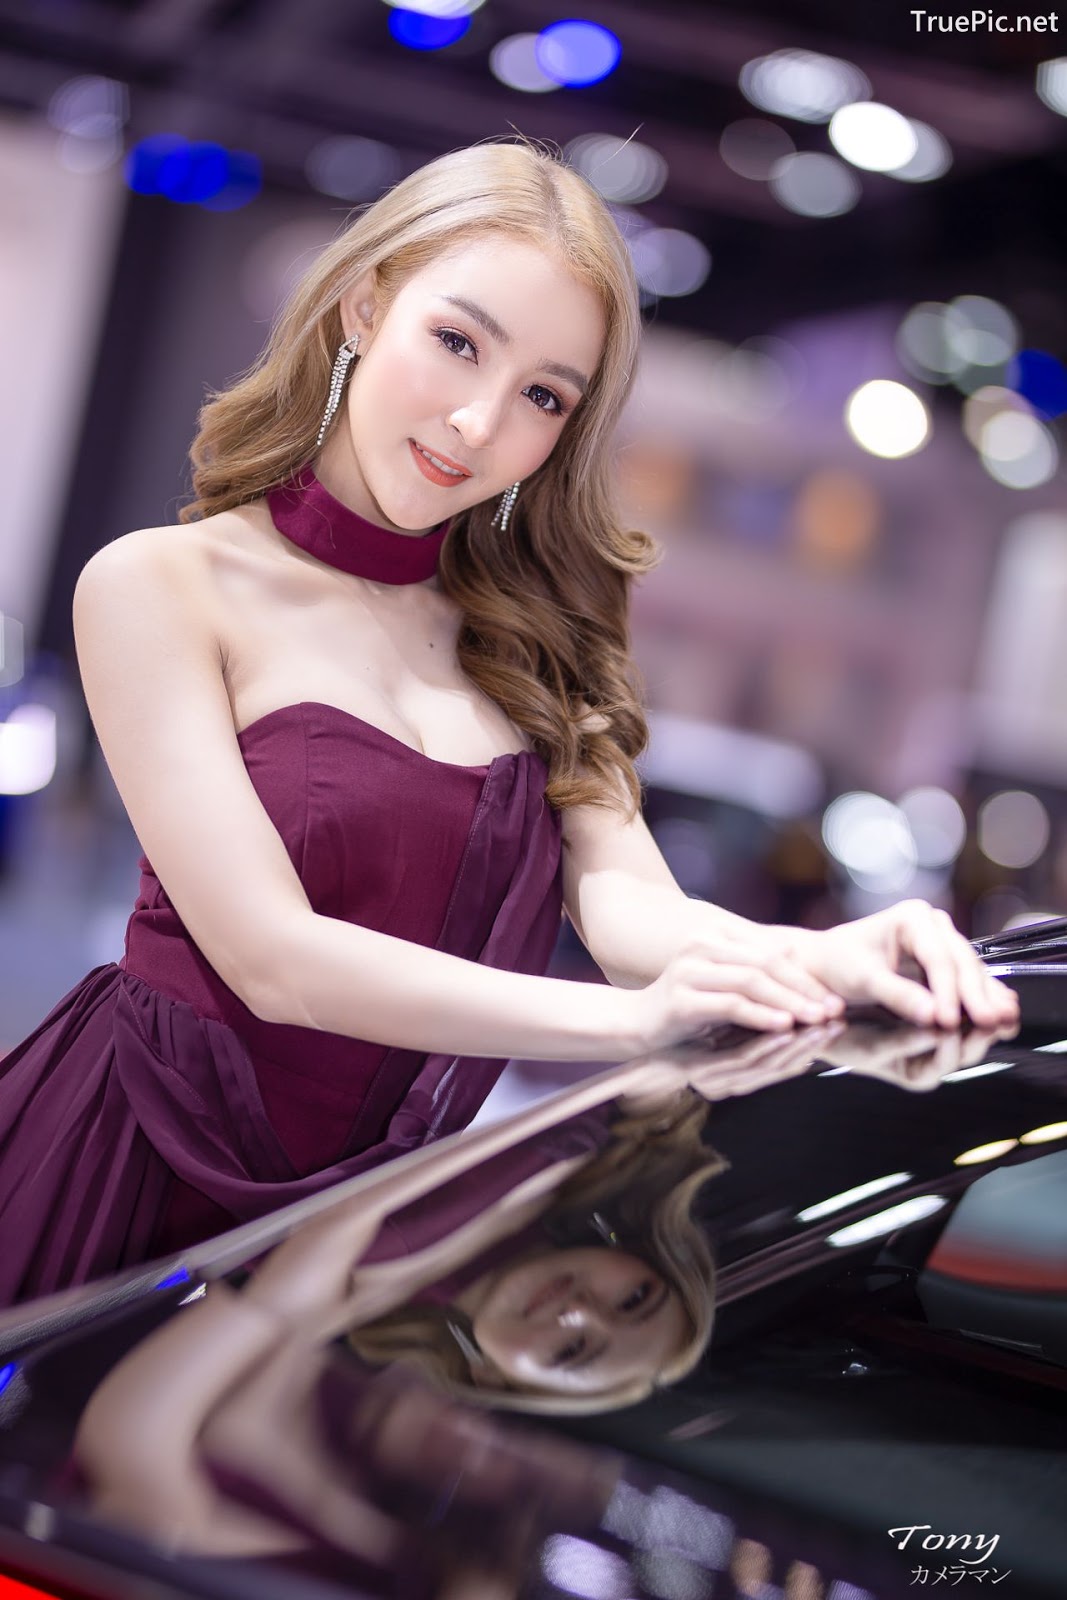 Image-Thailand-Hot-Model-Thai-Racing-Girl-At-Motor-Show-2019-TruePic.net- Picture-11